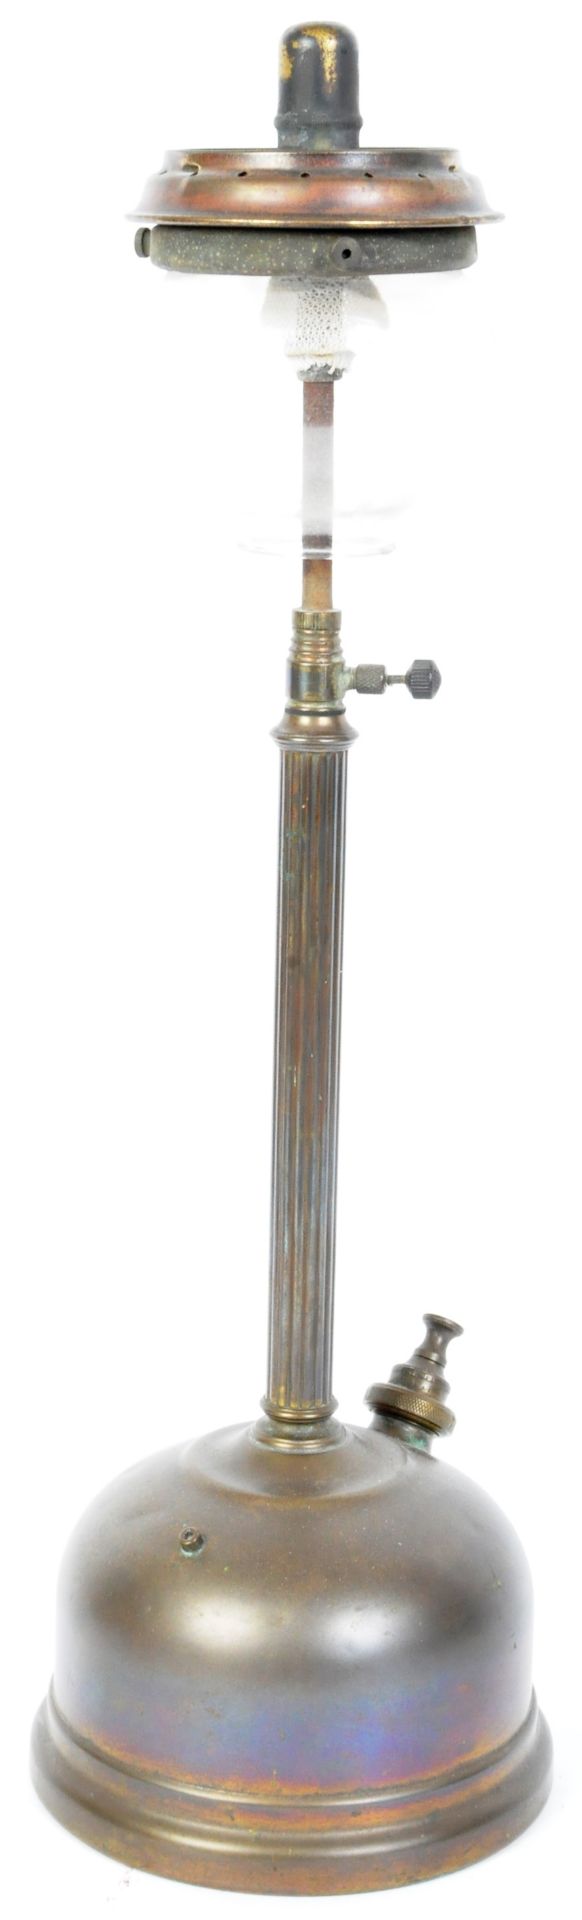 EARLY 20TH CENTURY PARAFFIN STREET LAMP OIL LAMP